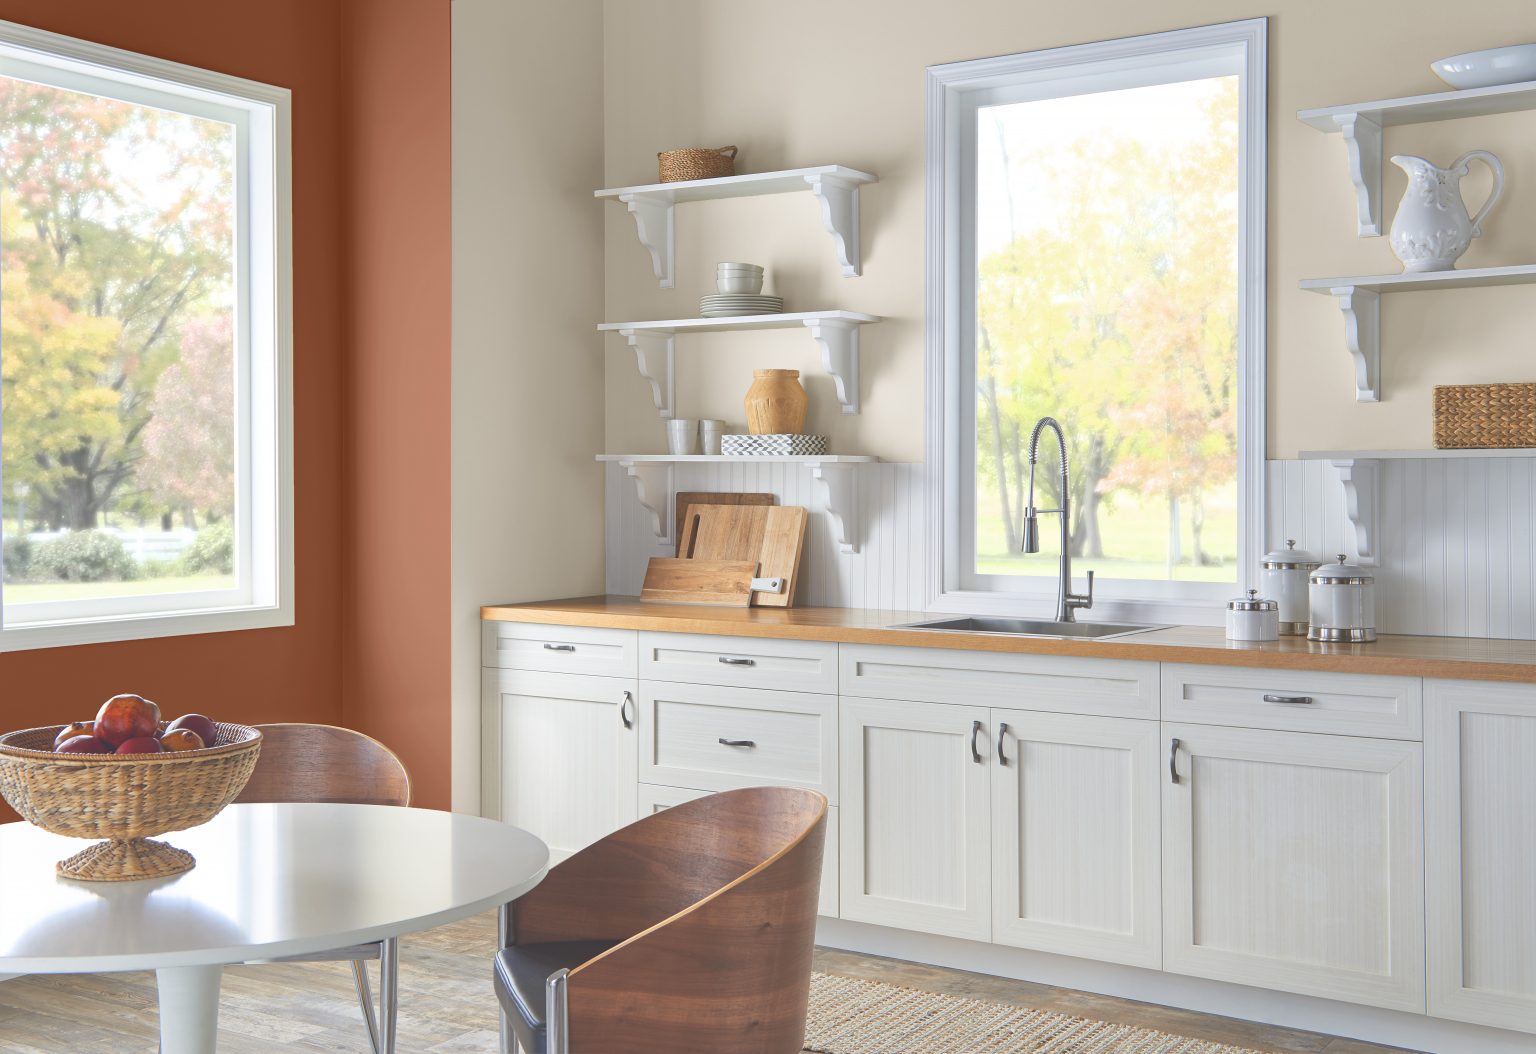 A kitchen with neutral walls and cabinets with an accent wall on the left in the colour Orange Flambe